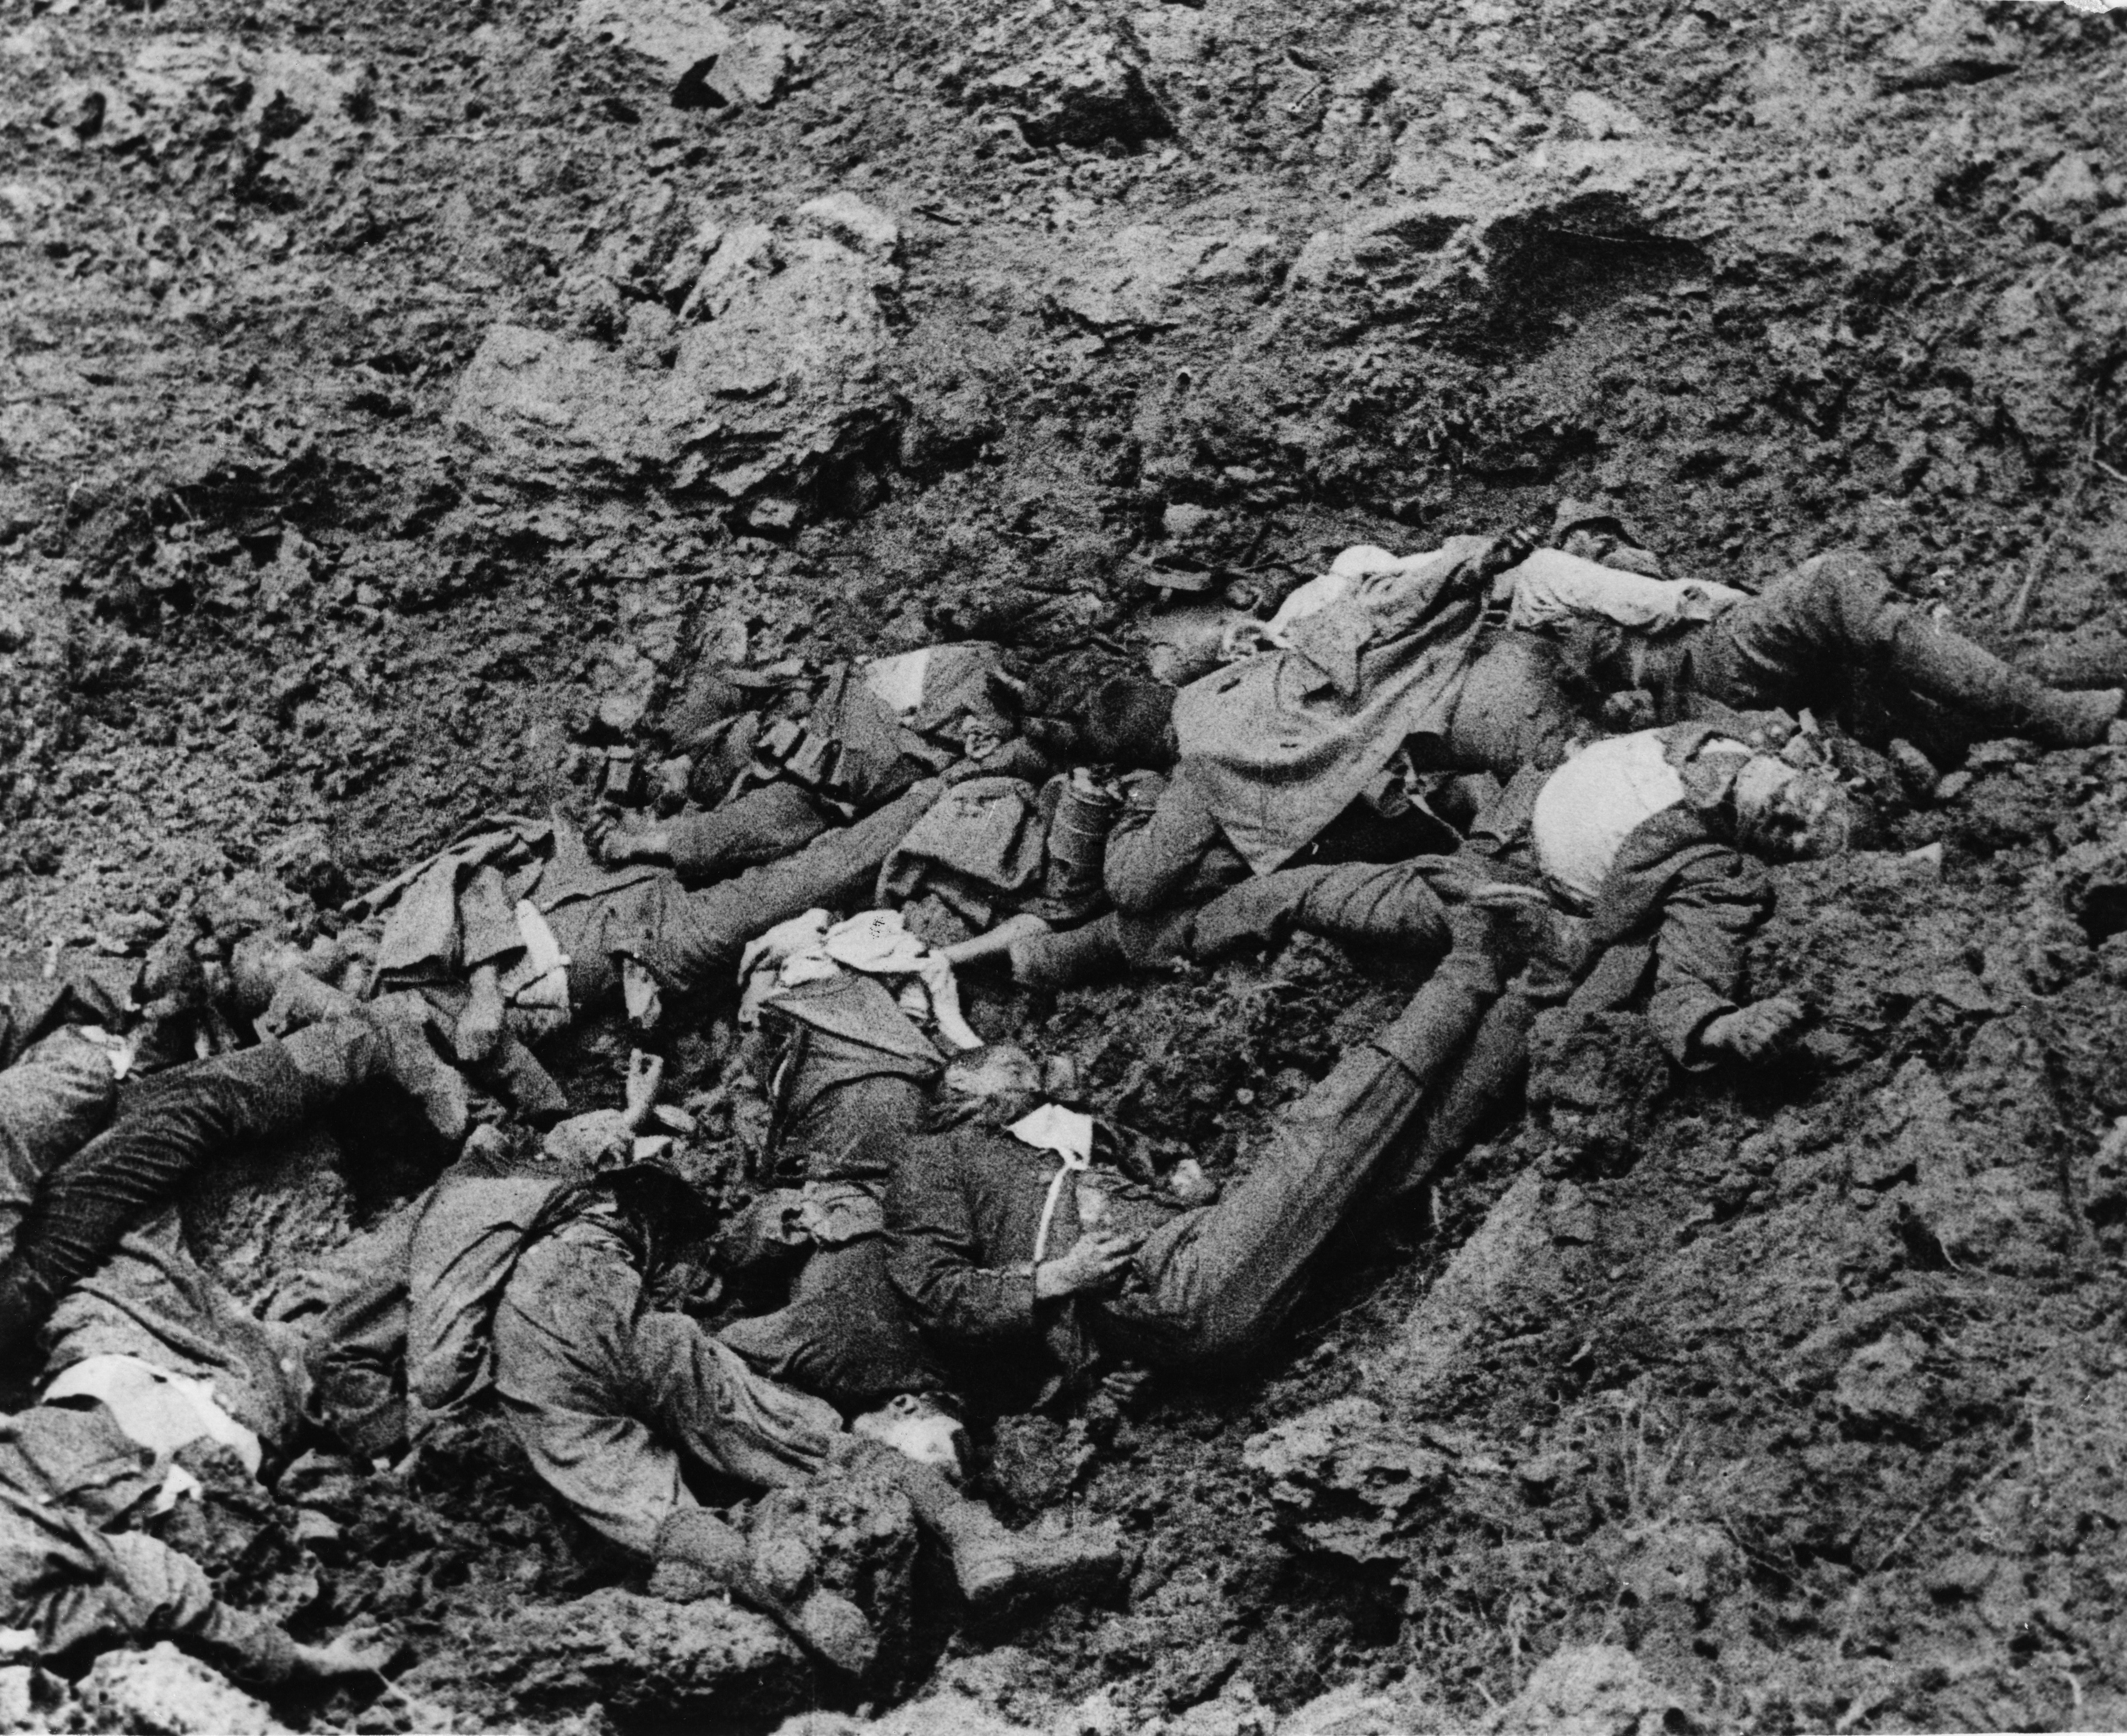 battle of somme